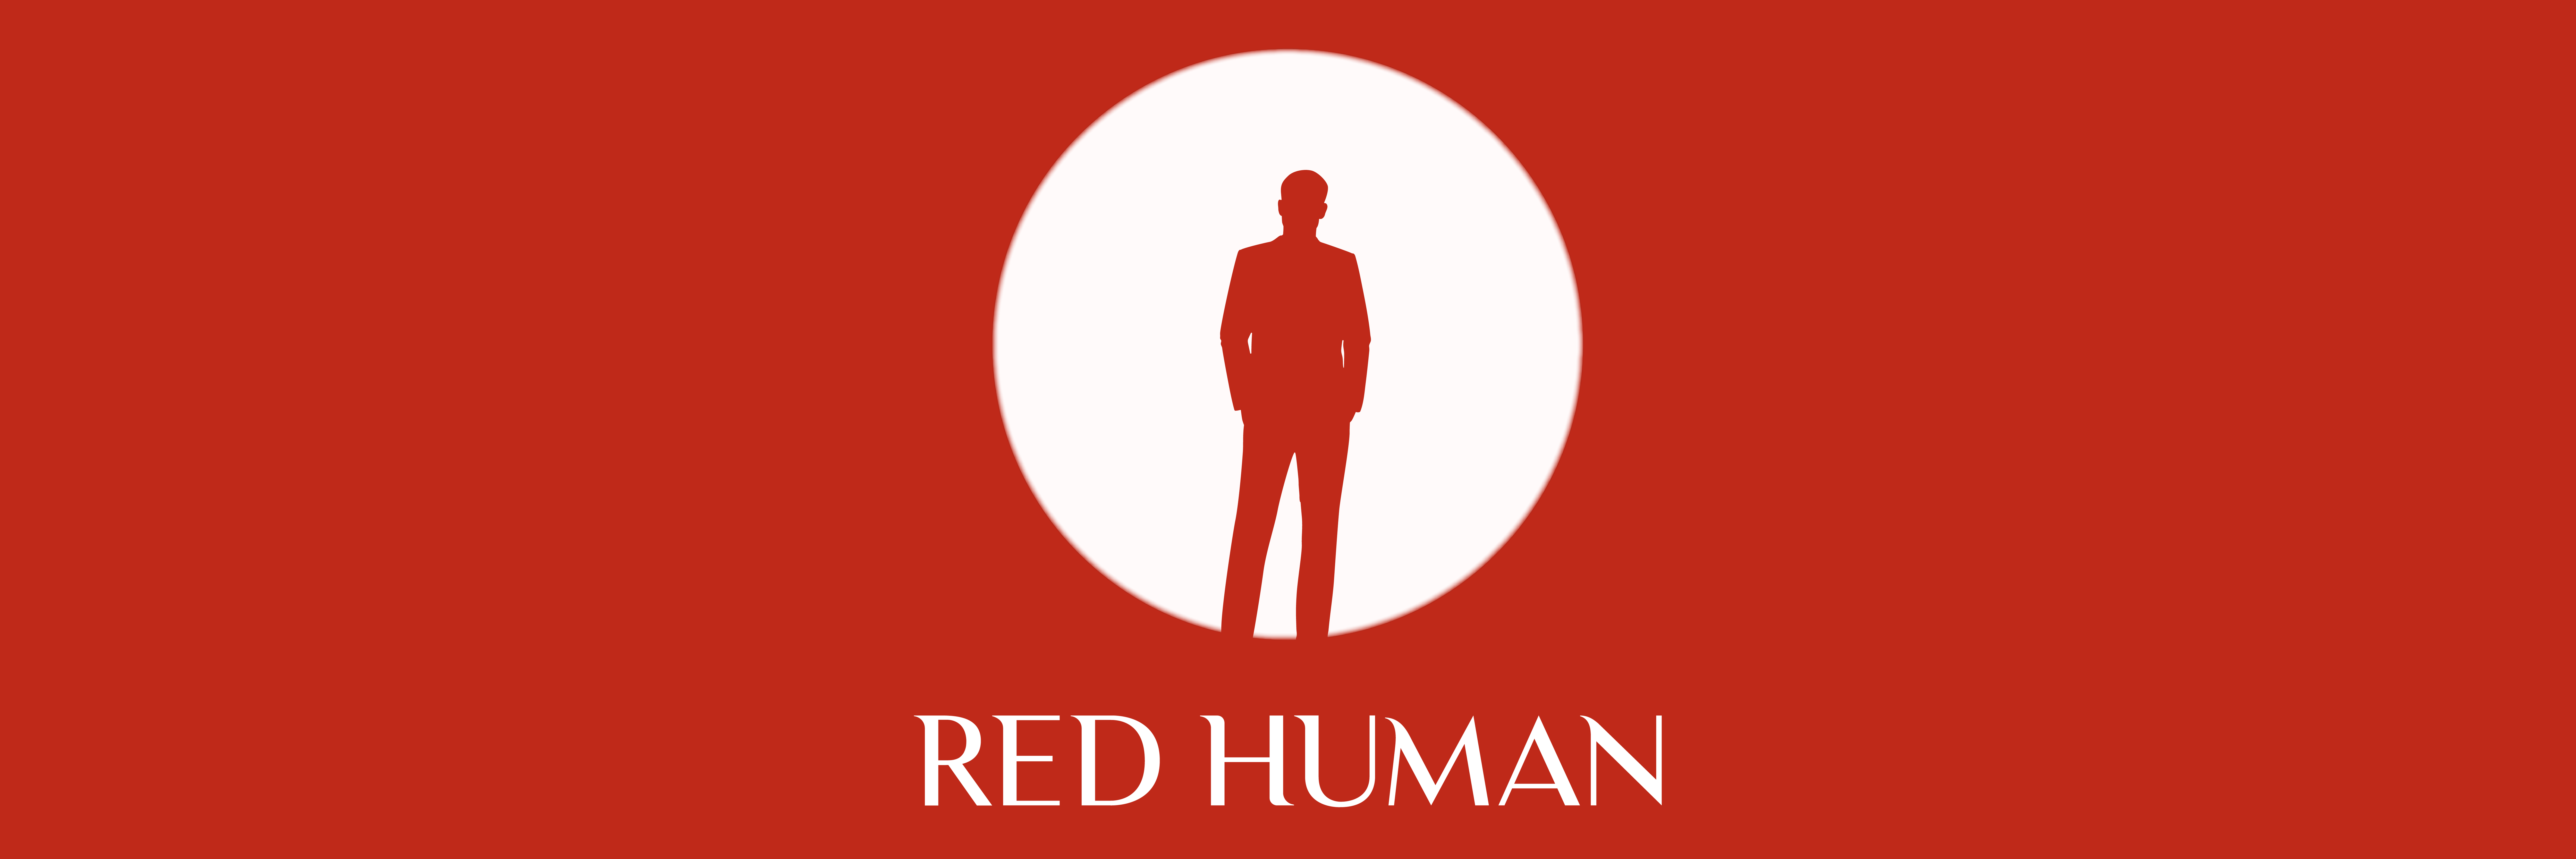 Red Human Logo depicting a red background with a white spotlight which creates the silhouette of a person